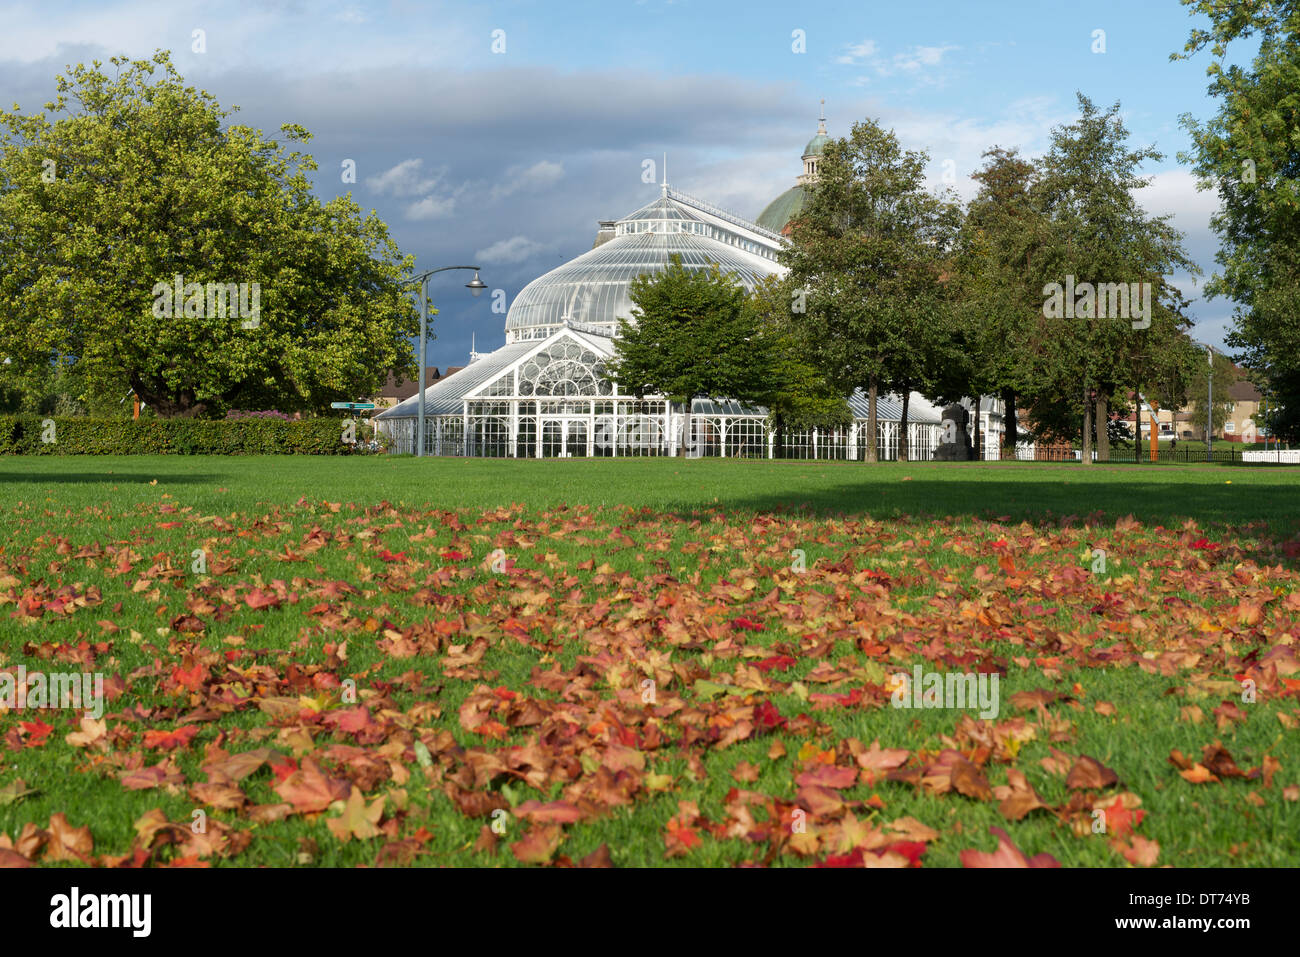 The Peoples' Palace and Winter Garden, Glasgow Green. Stock Photo